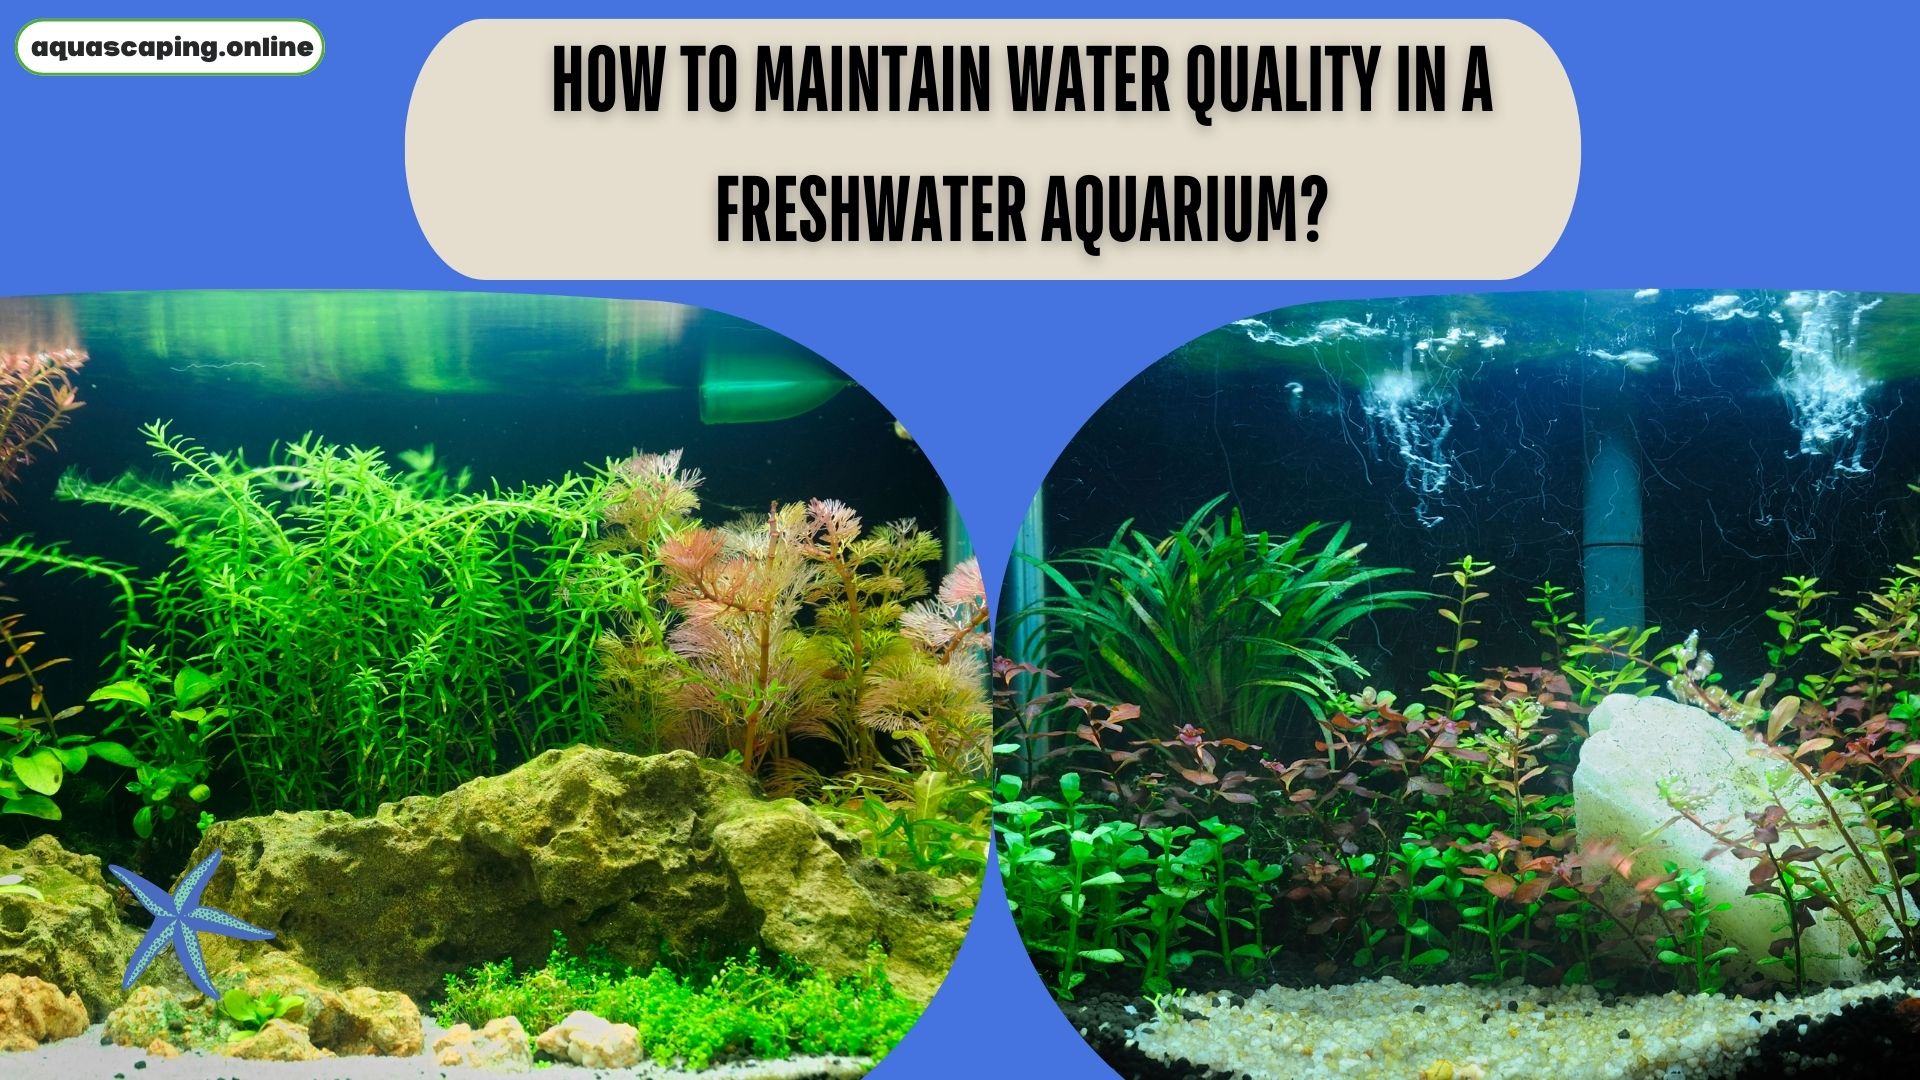 Water quality in a freshwater aquarium?